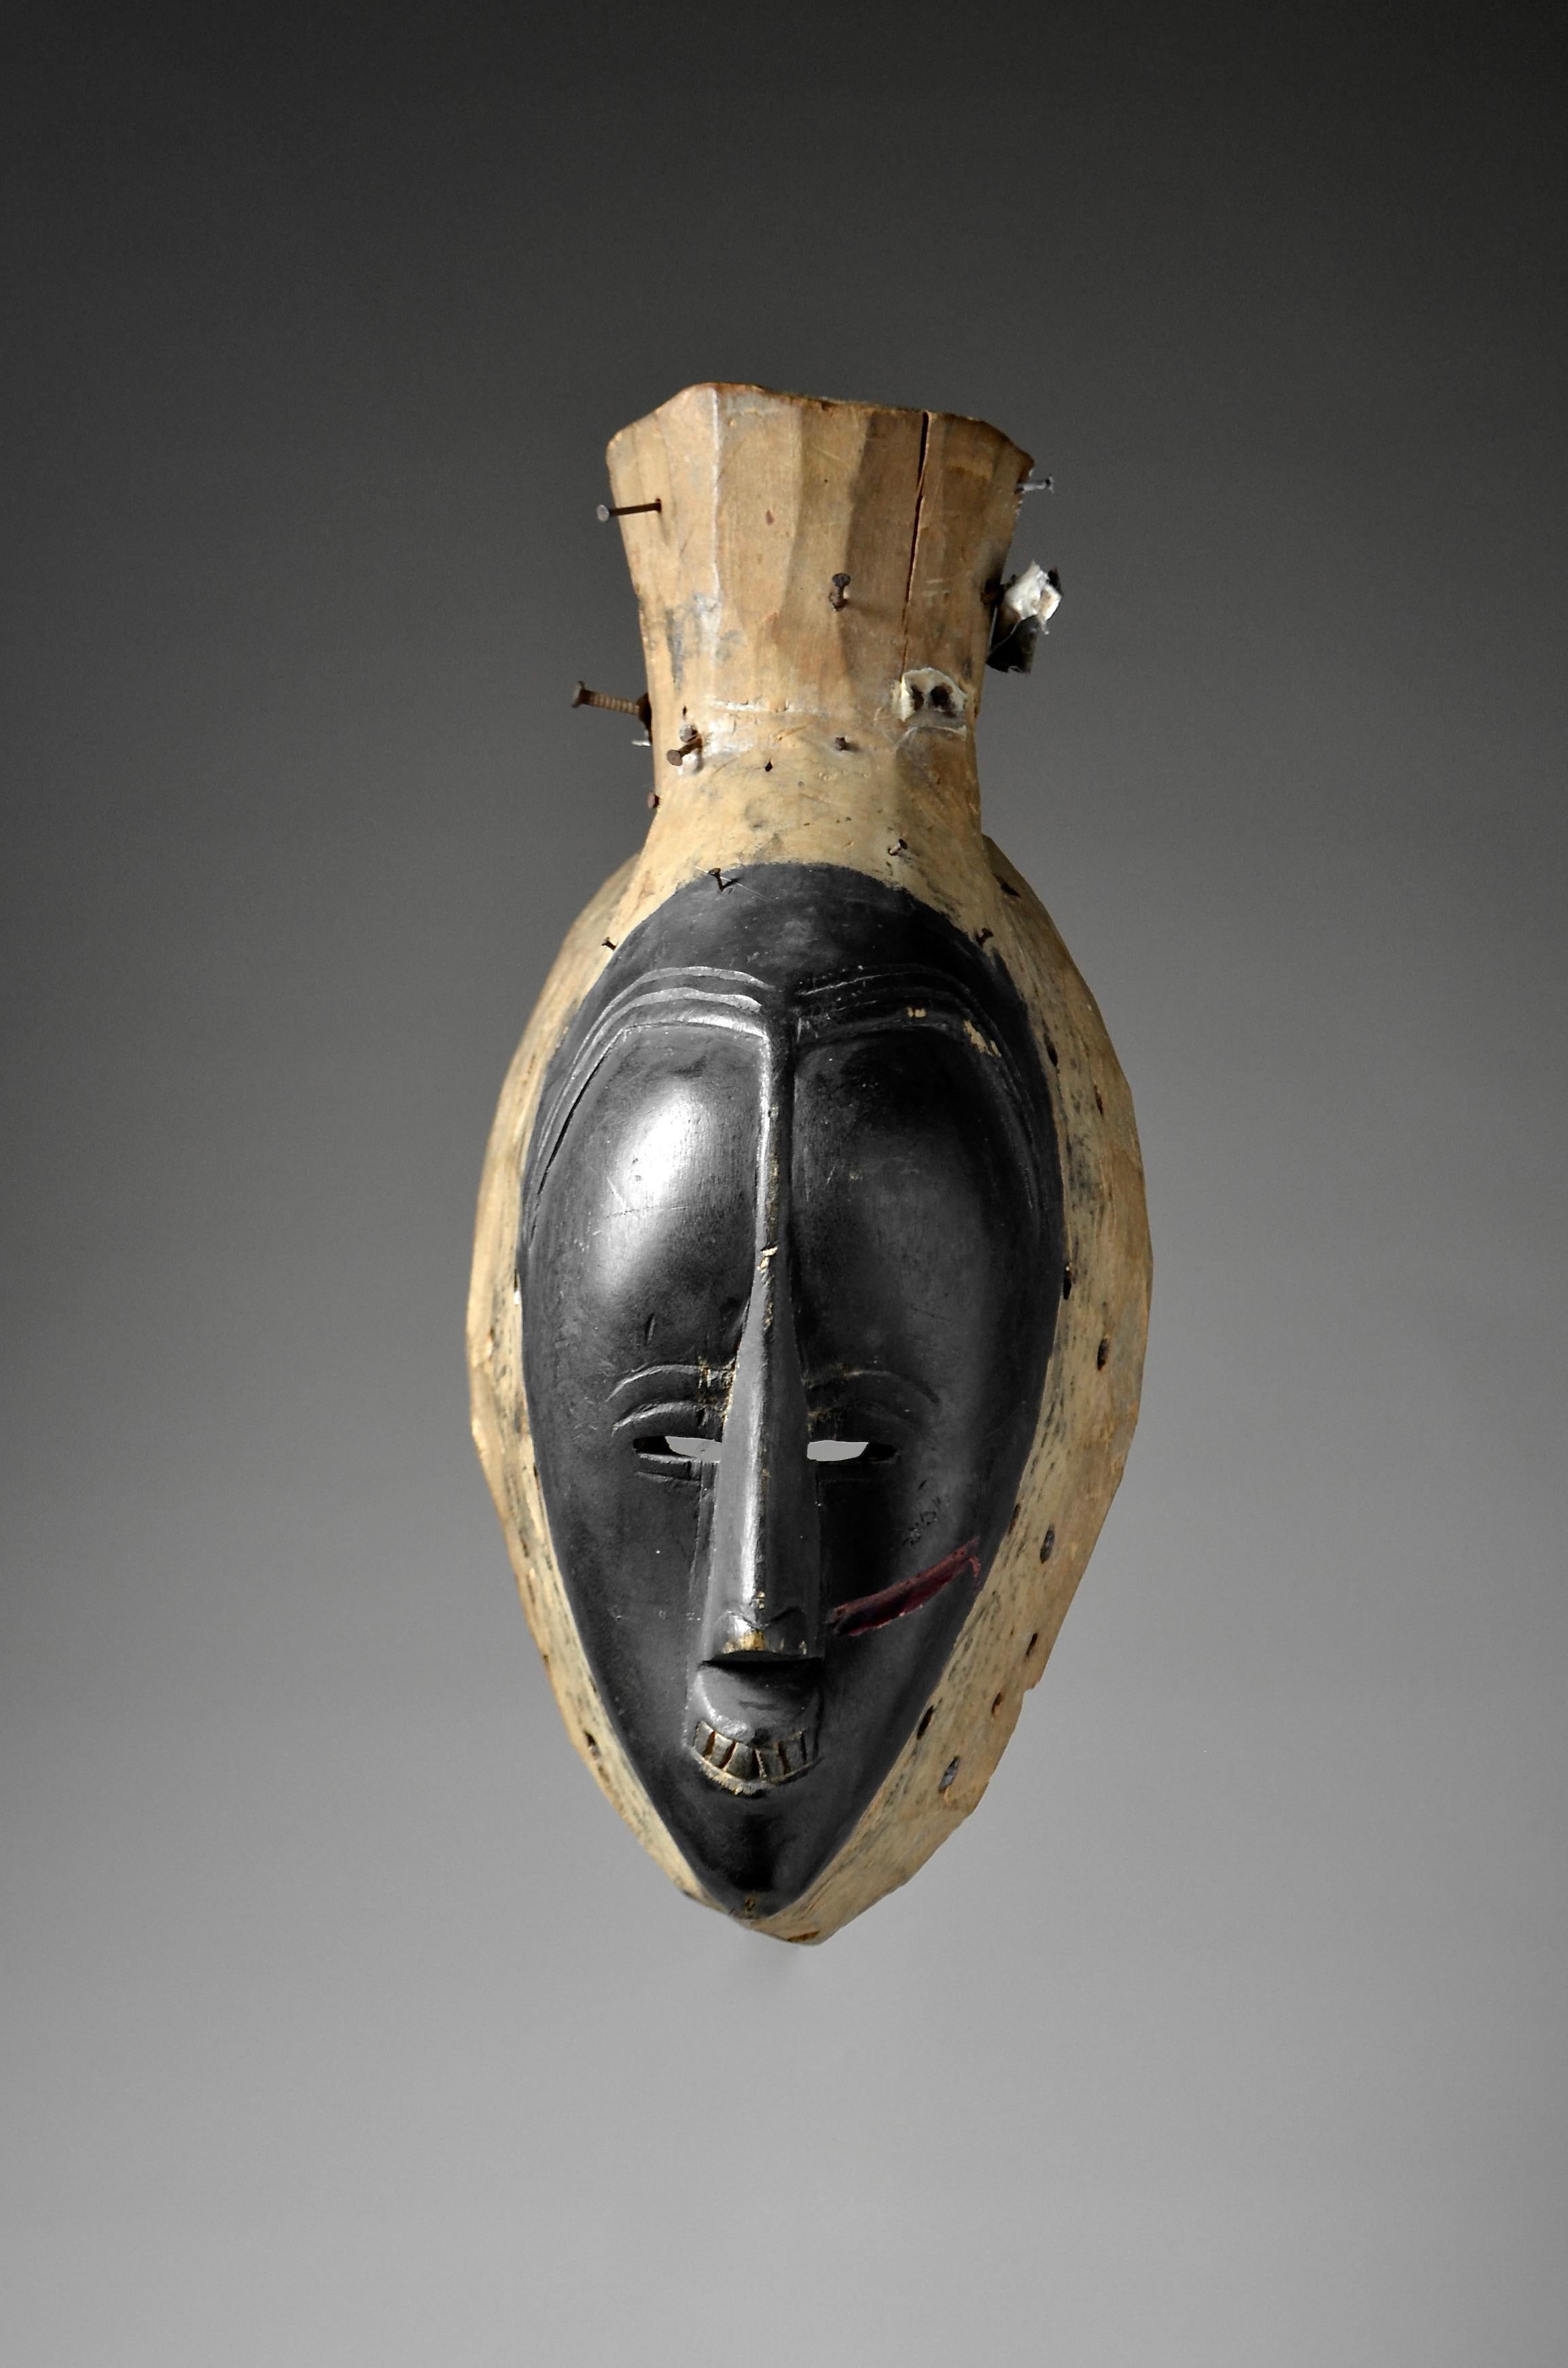 Guro mask 'kyasa'
Ivory Coast
Wood, paint, metal, hide
38cm

Provenance:
Peter Peretti (1945-2022)  London, United Kingdom
Acquired in Paris in the mid 1960s